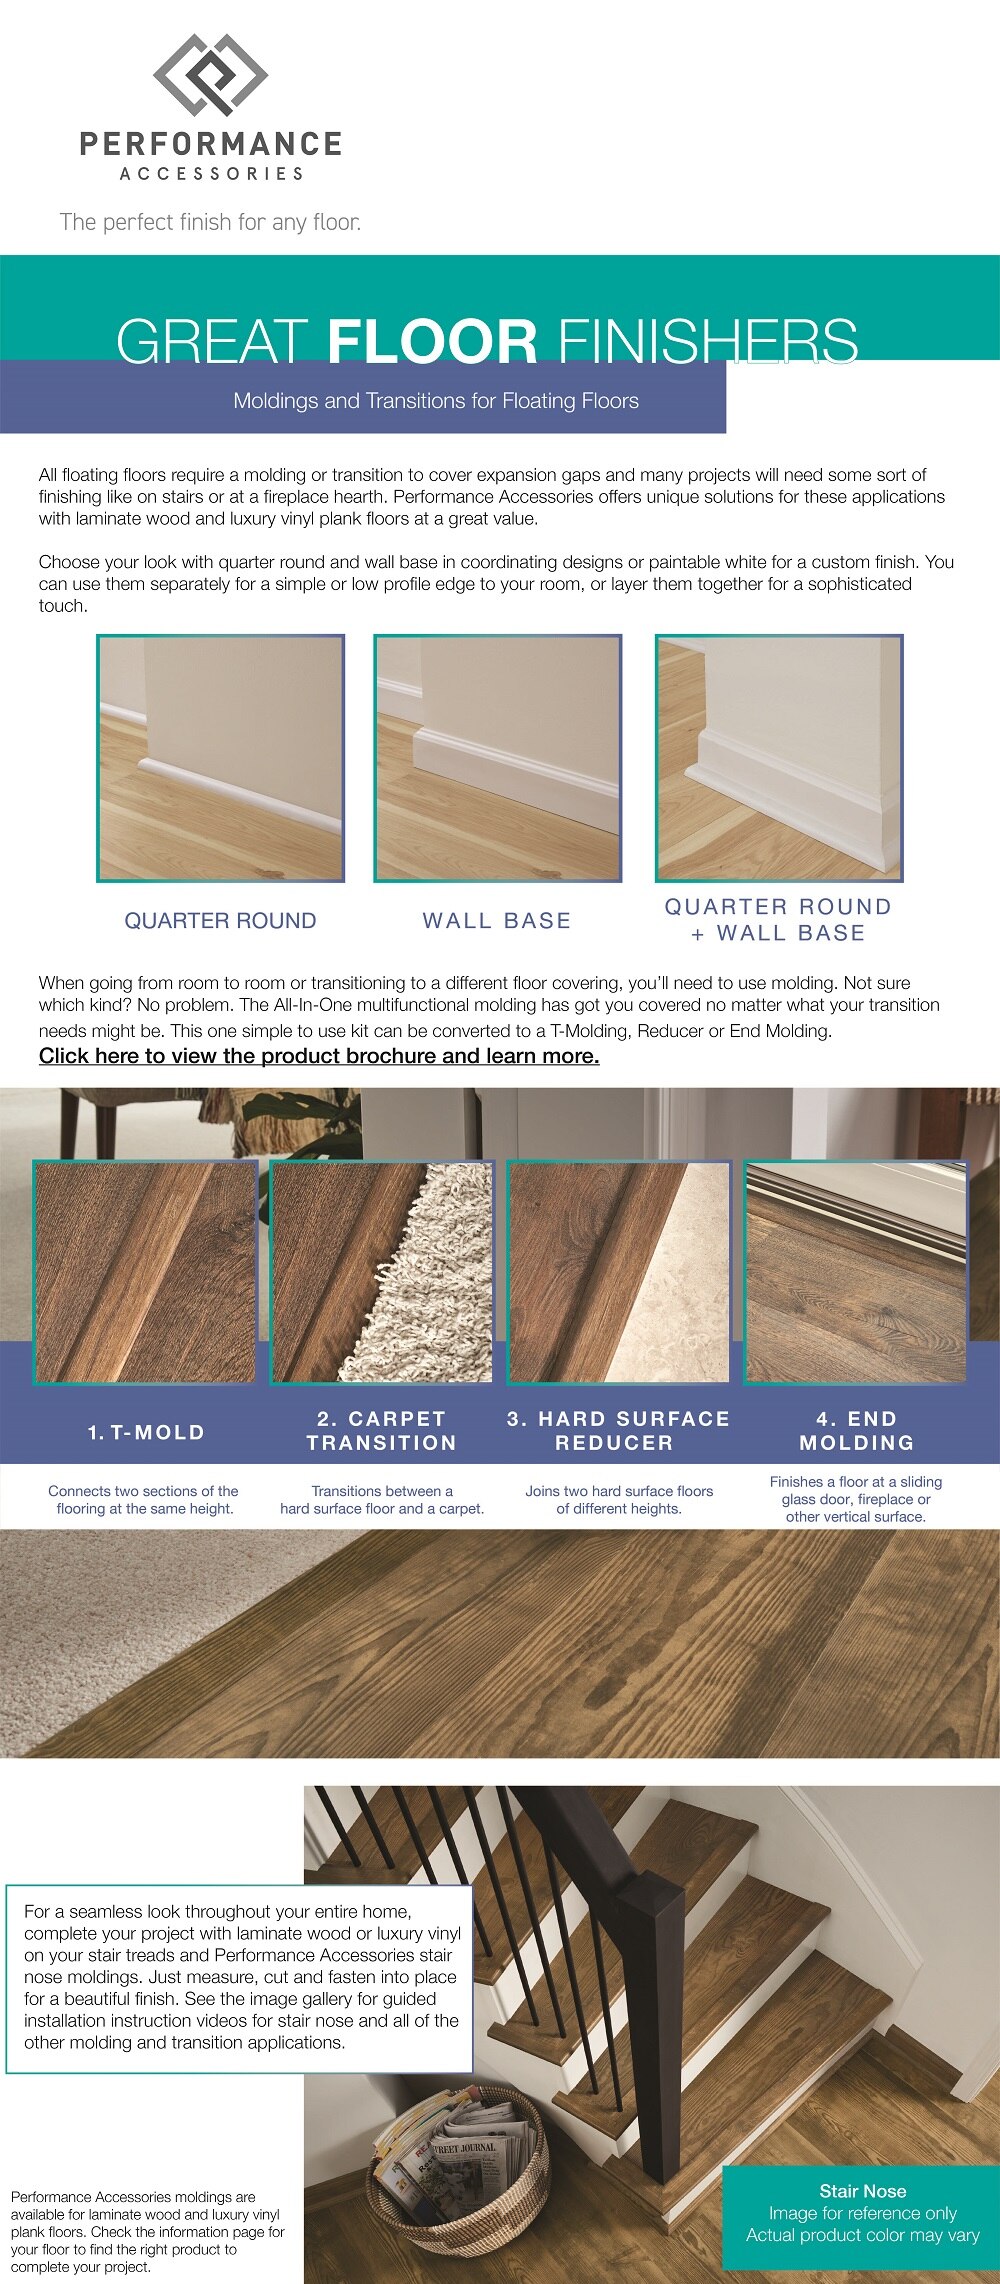 Performance Accessories quarter round and wall base moldings can be used with luxury vinyl plank floors or laminate wood floors to complete your project